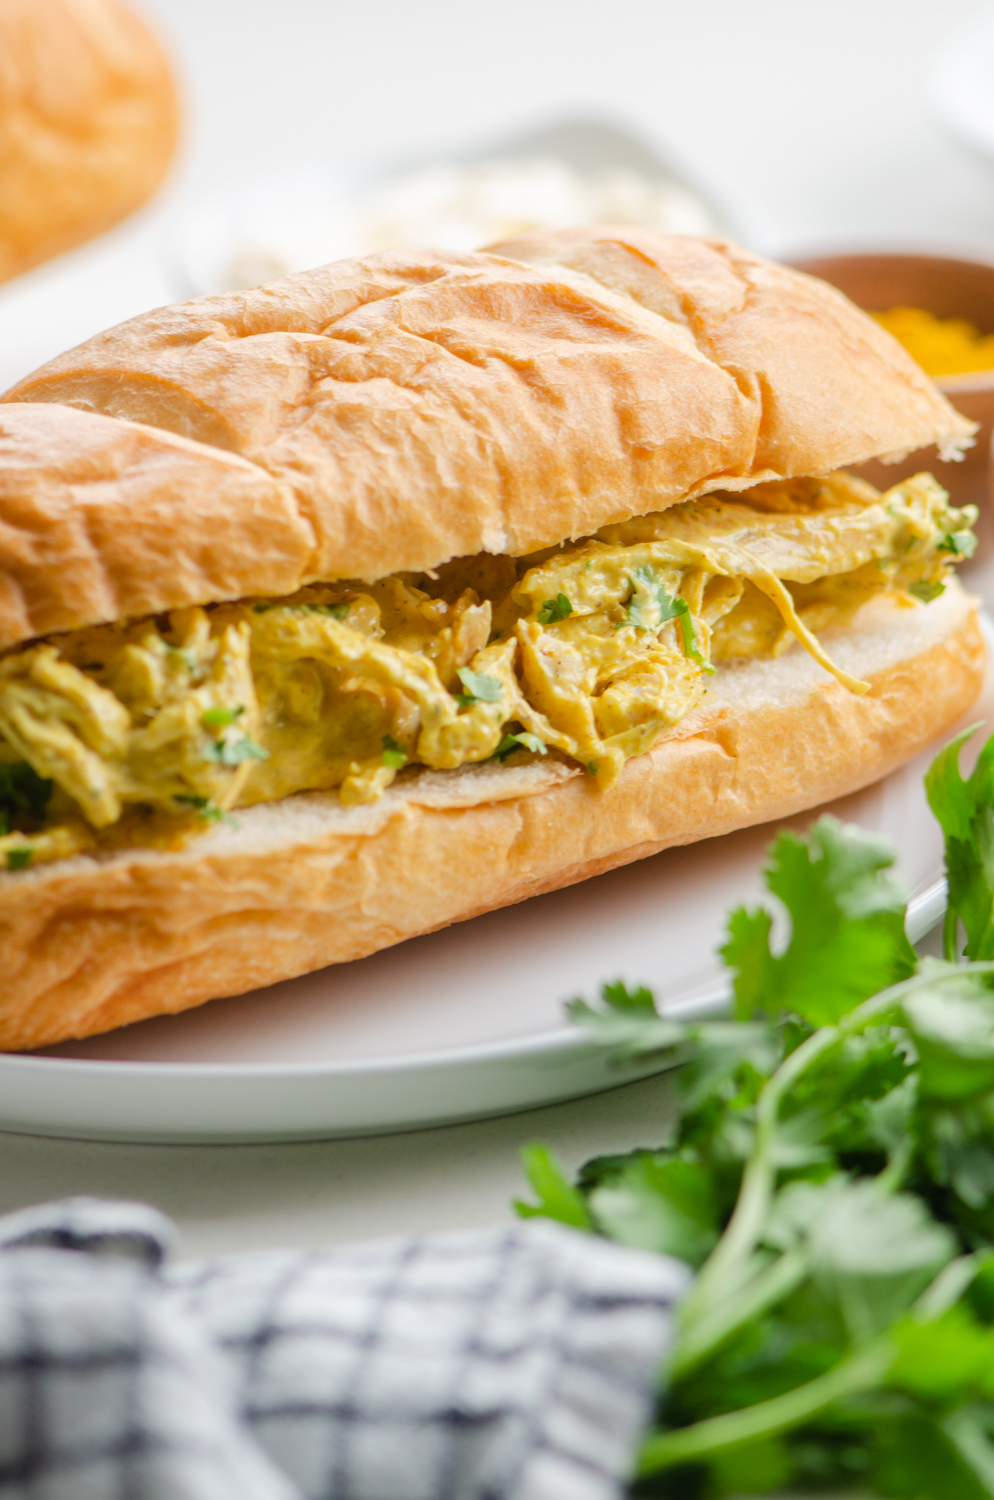 Curried Chicken Salad Sandwiches with Naan - The Food Charlatan